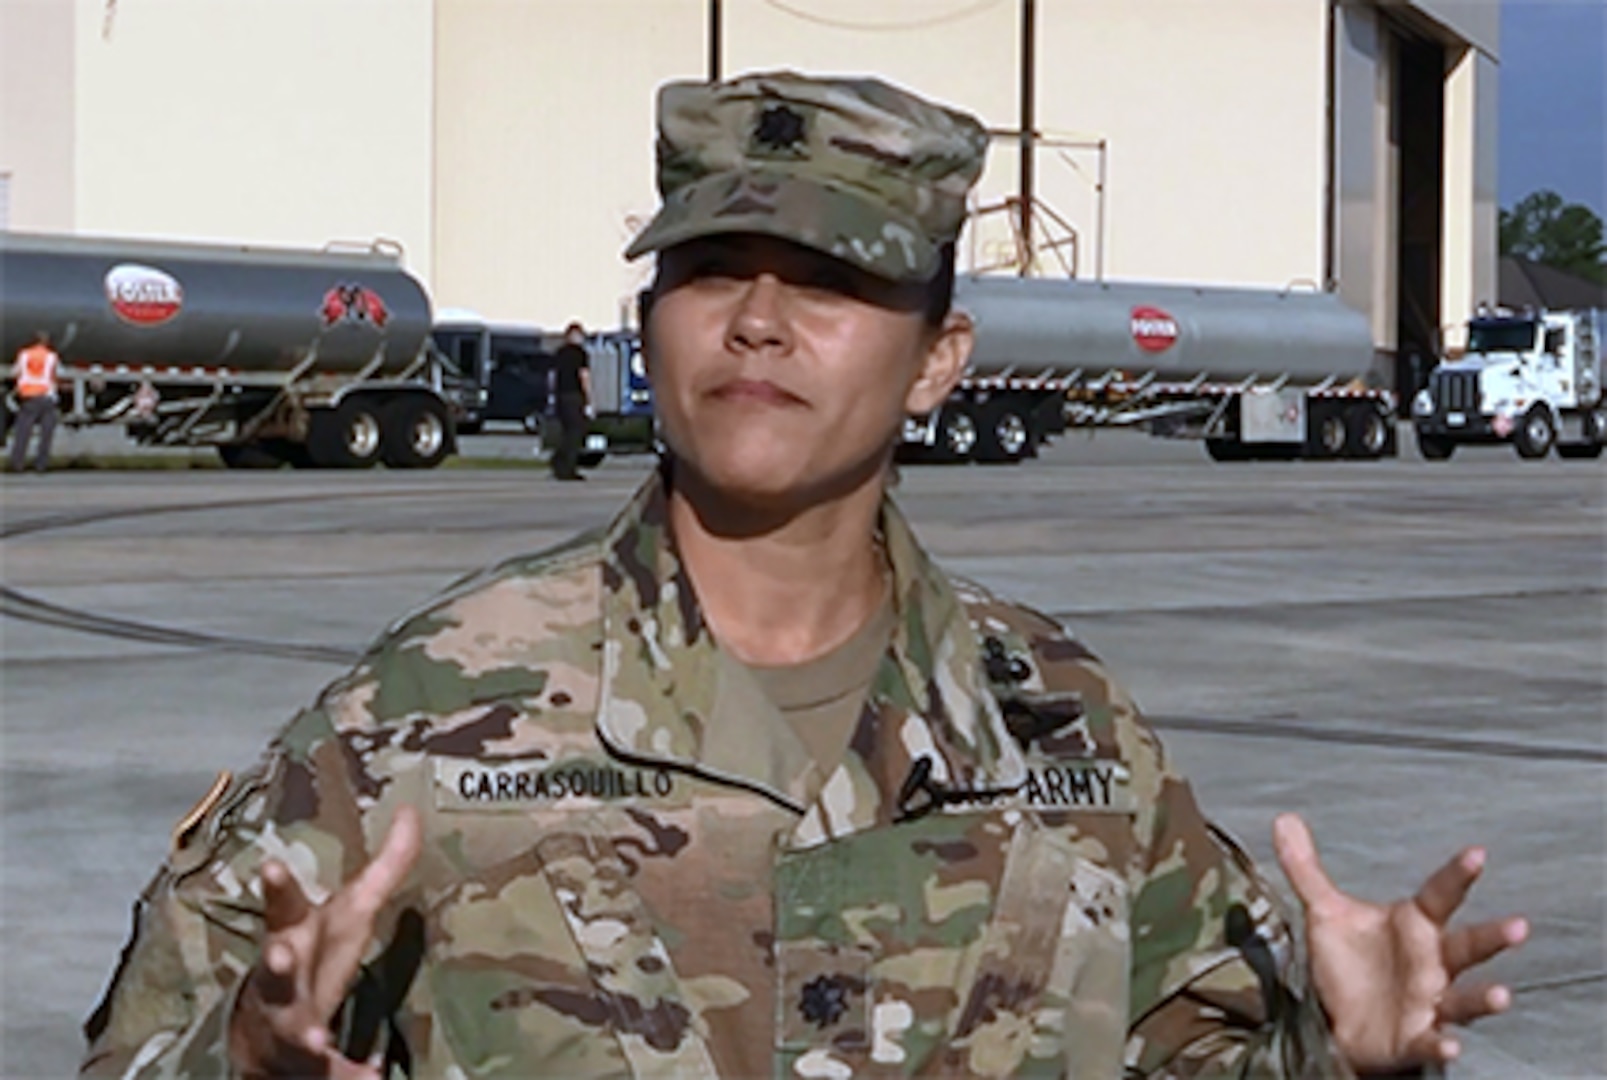 DLA Energy Americas at Houston Commander Army Lt. Col. Josiel Carrasquillo stands in front of Foster Fuels trucks at Warner Robins Air Force Base